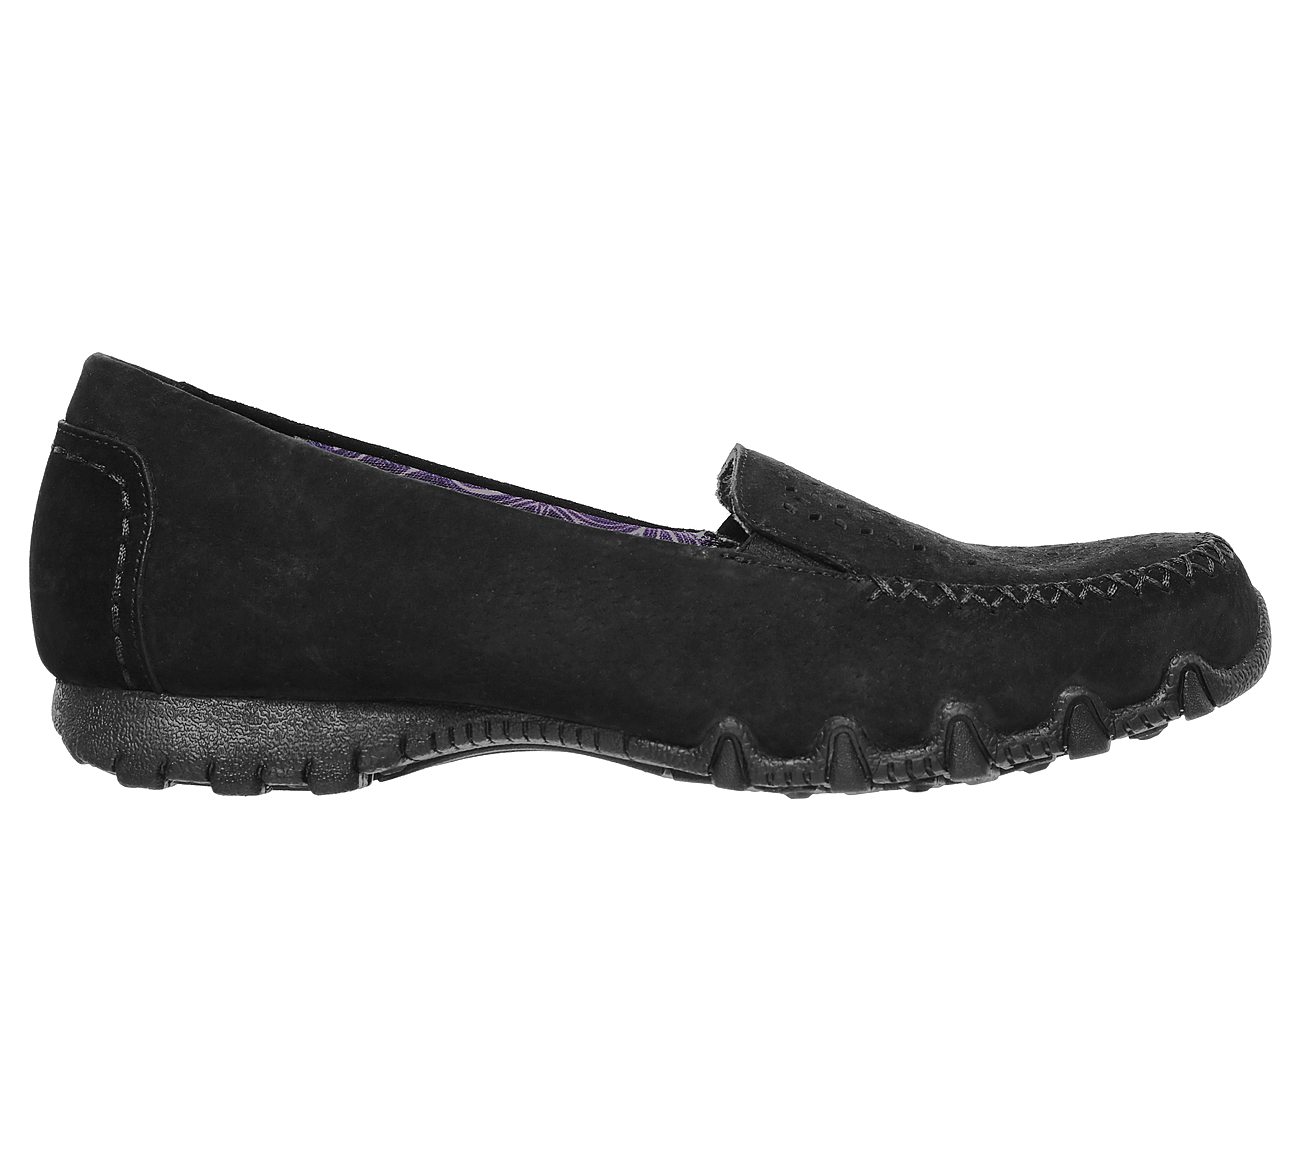 skechers relaxed fit bikers women's shoes